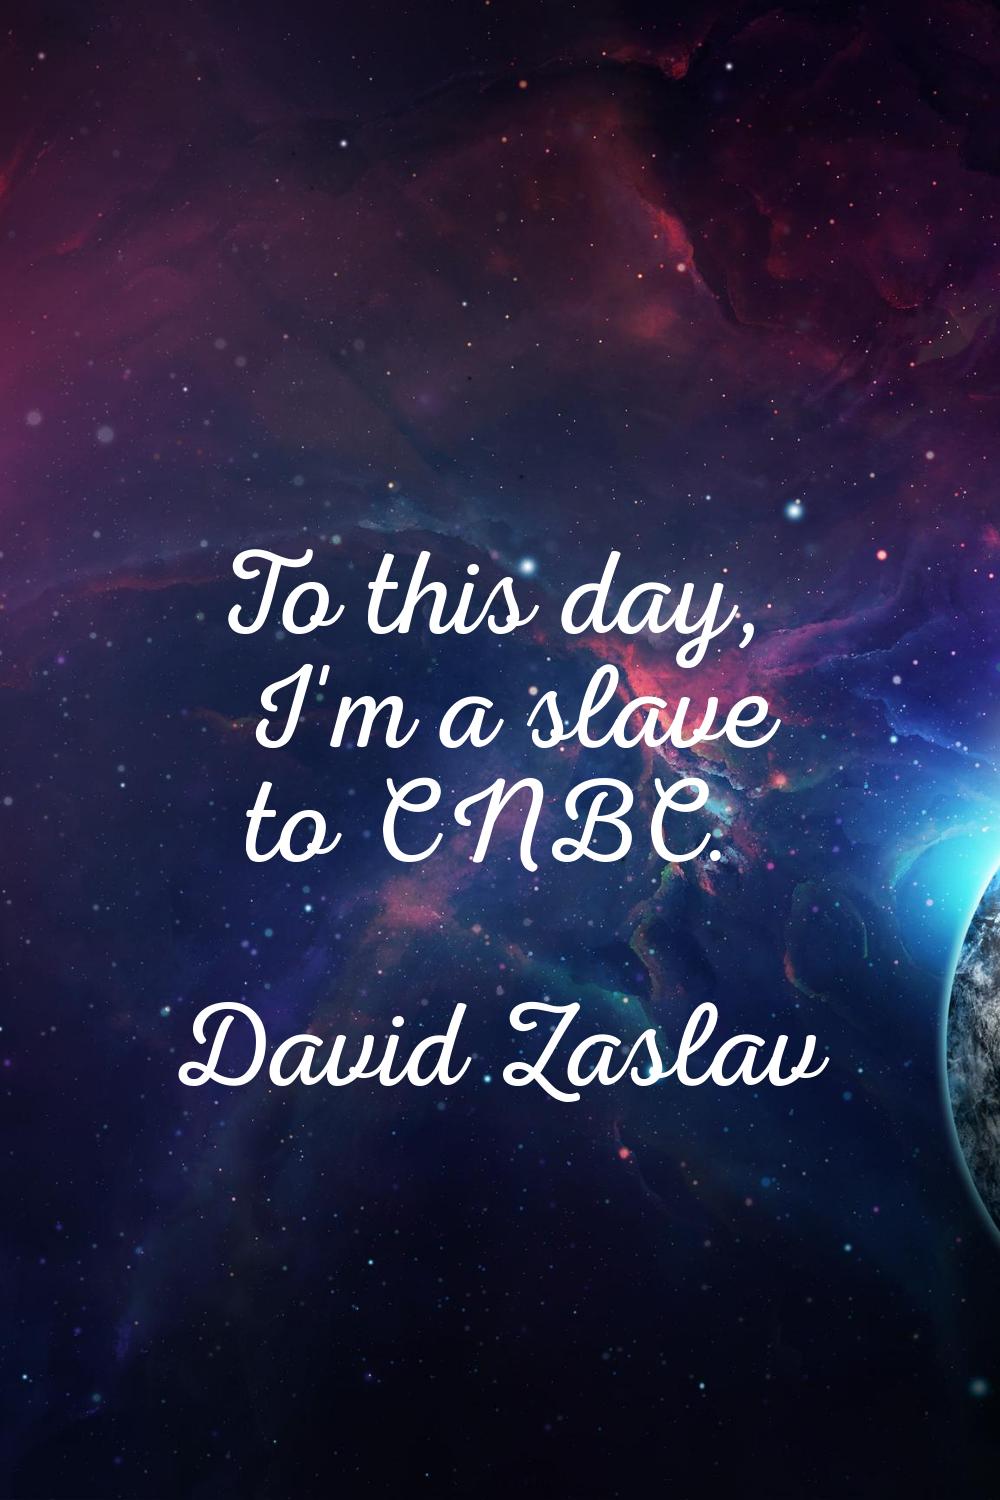 To this day, I'm a slave to CNBC.